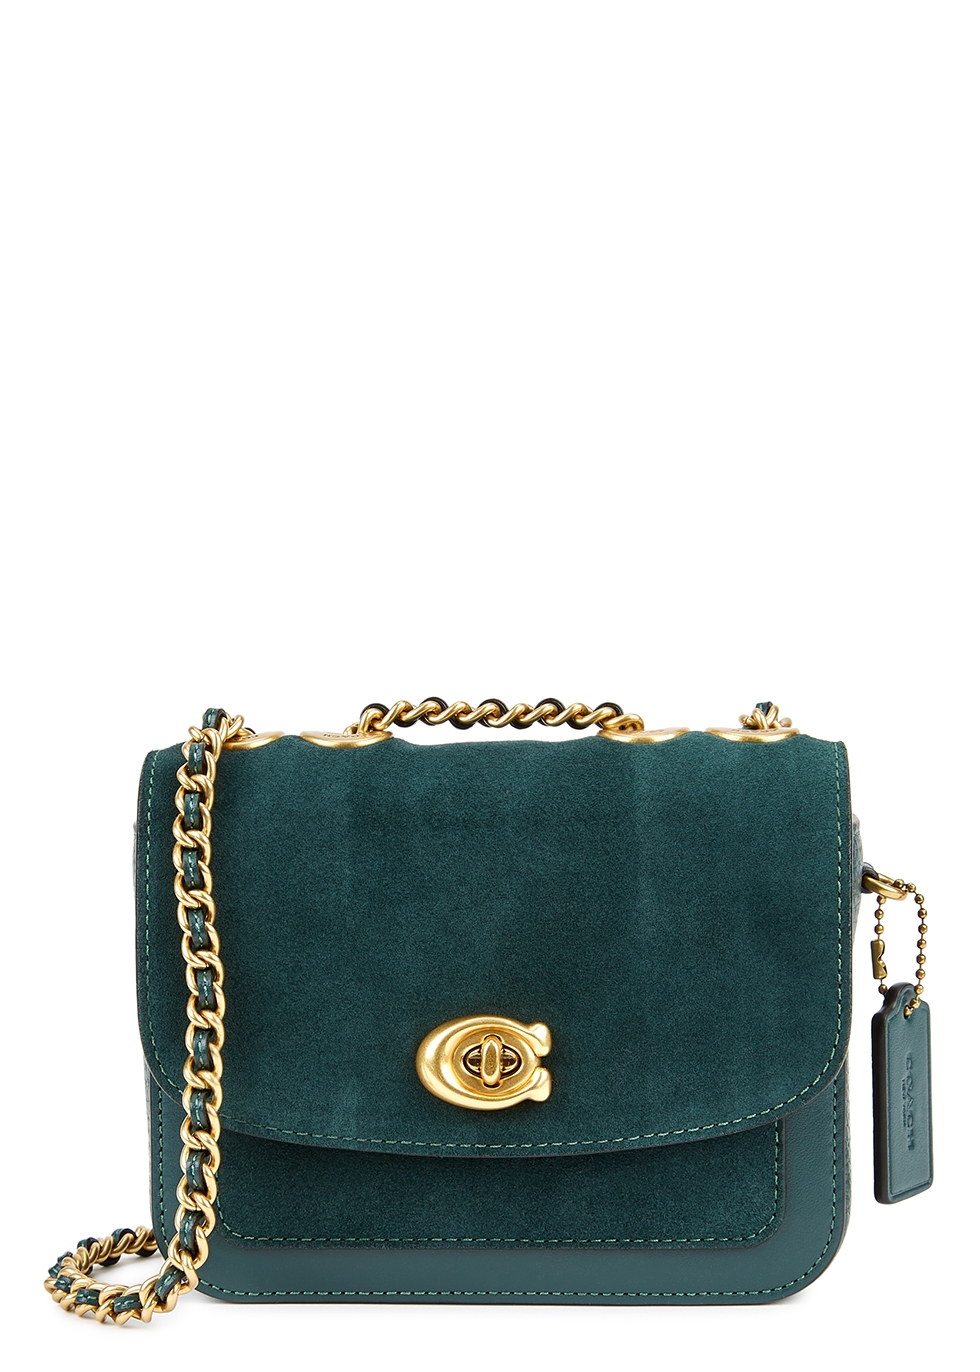 Madison 16 green leather and suede cross-body bag